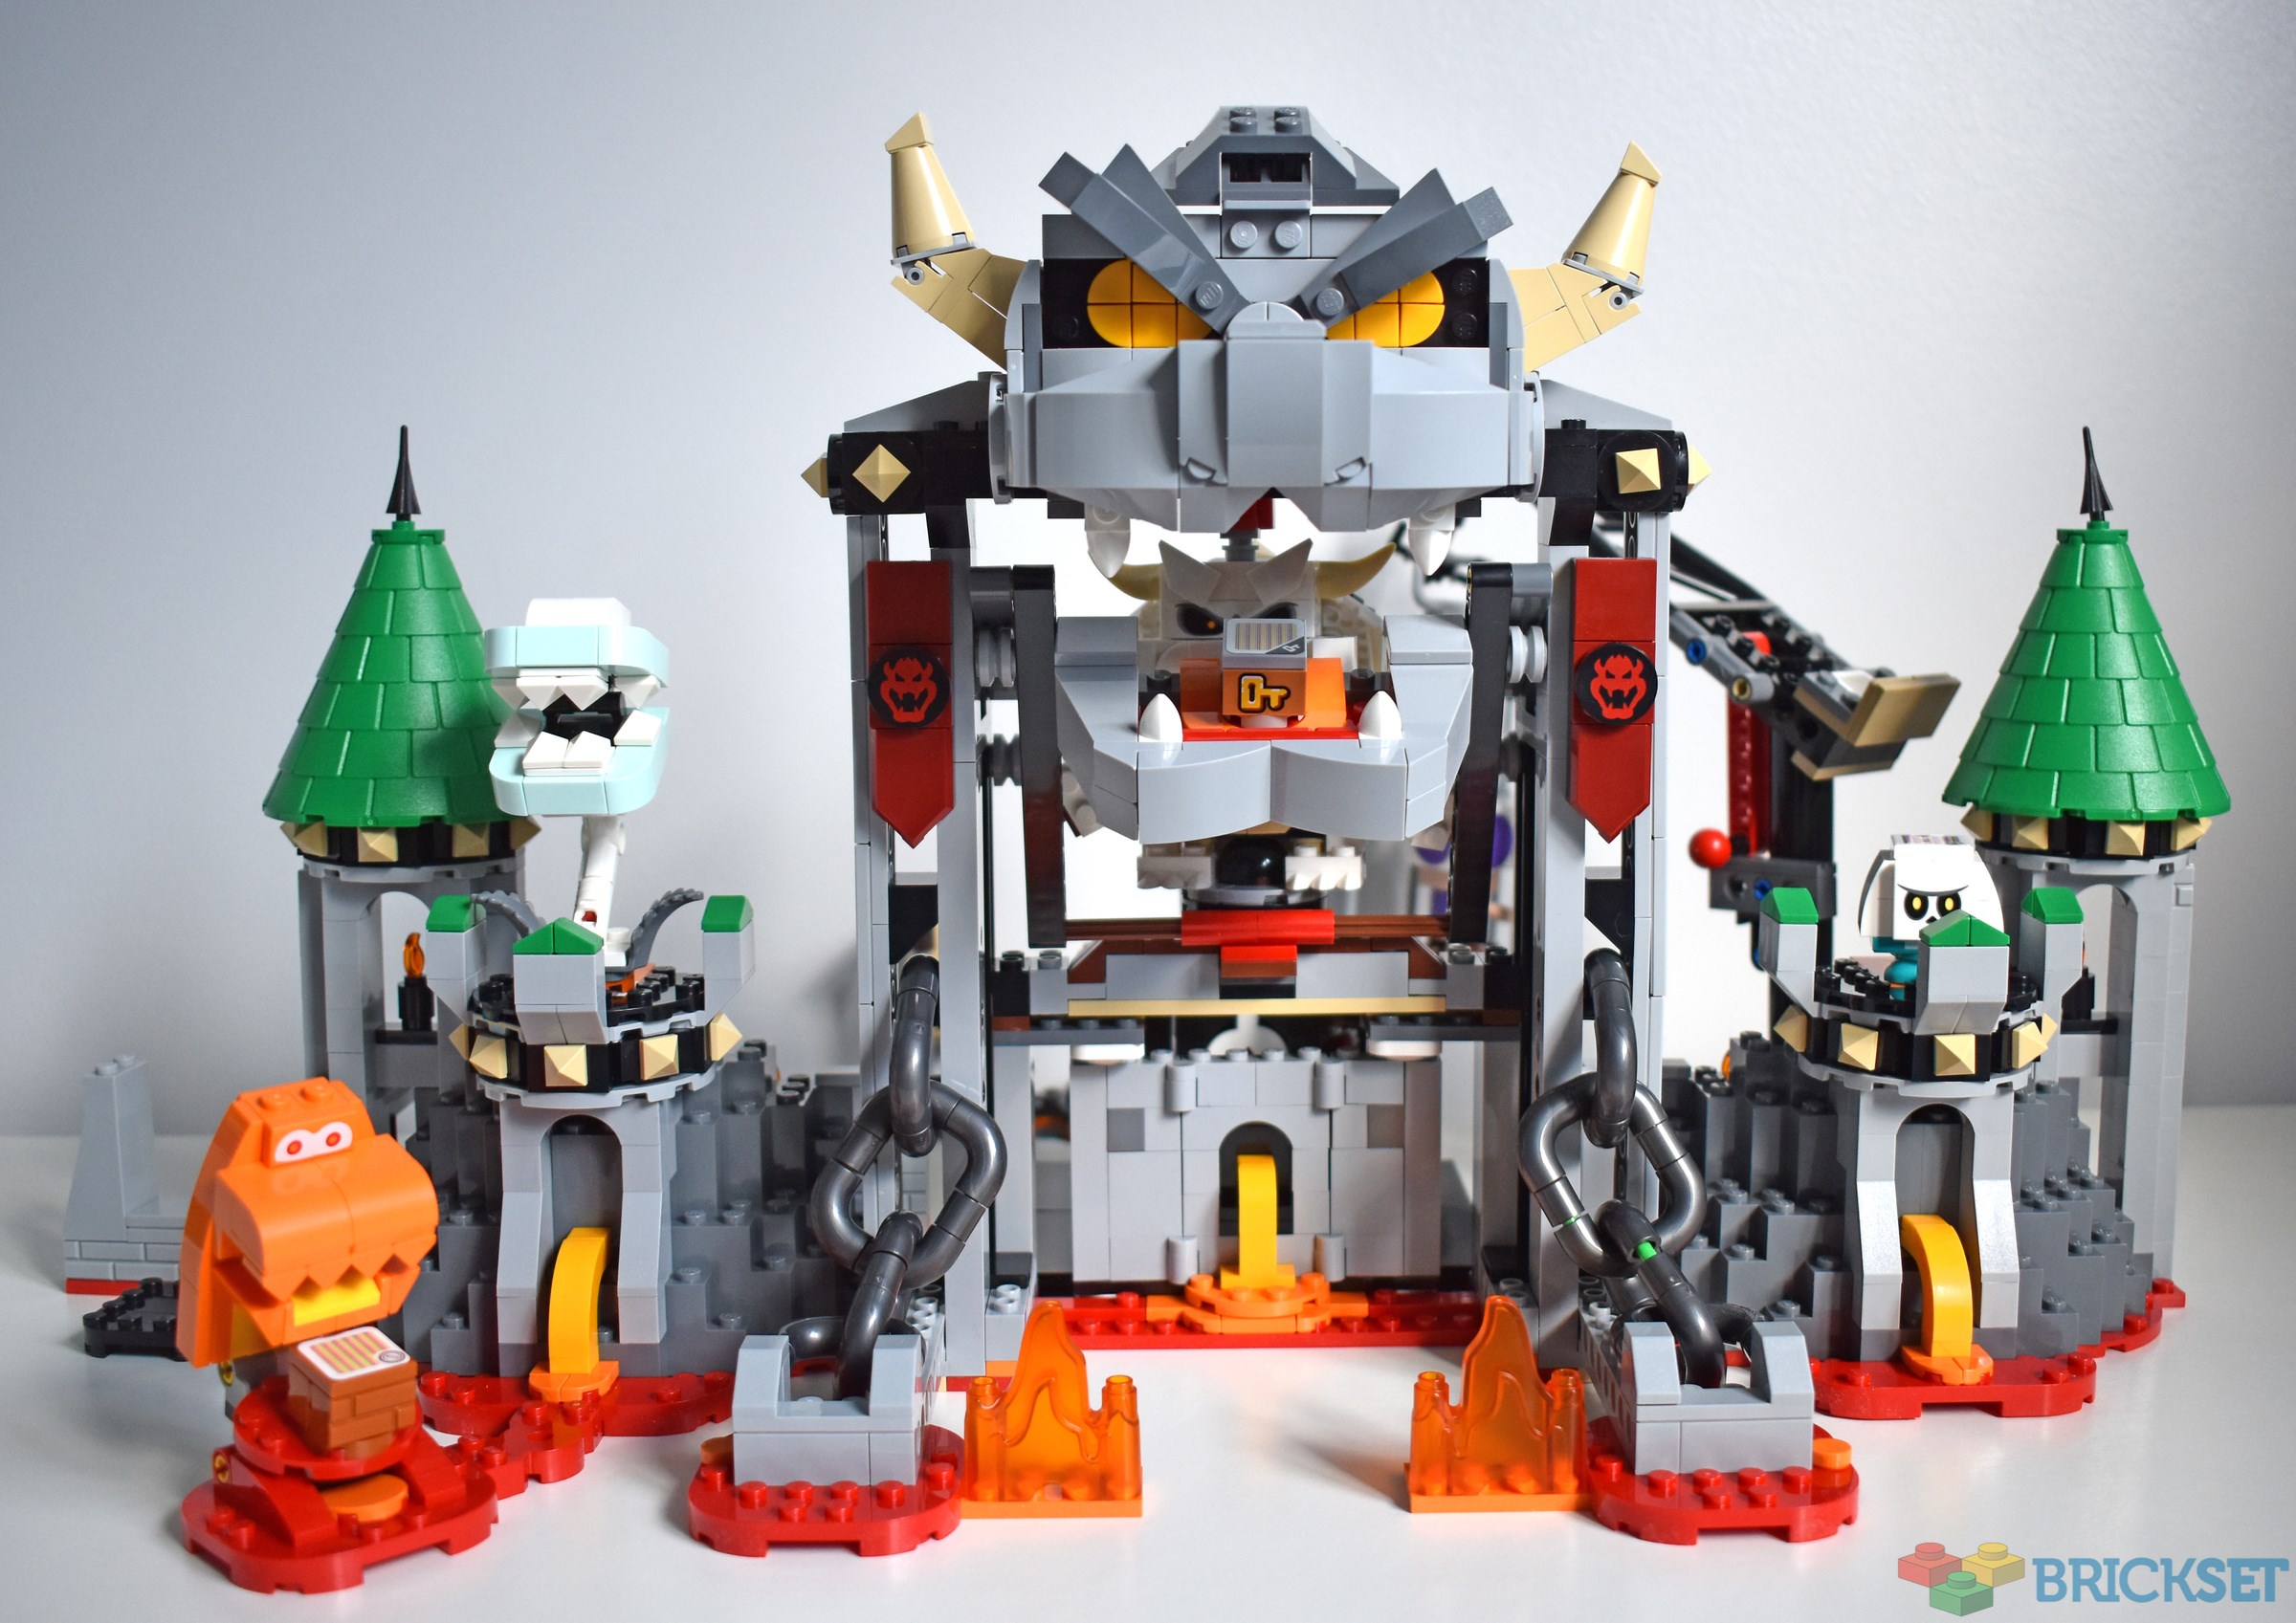 Lego's latest Super Mario set takes you to Dry Bowser's Castle